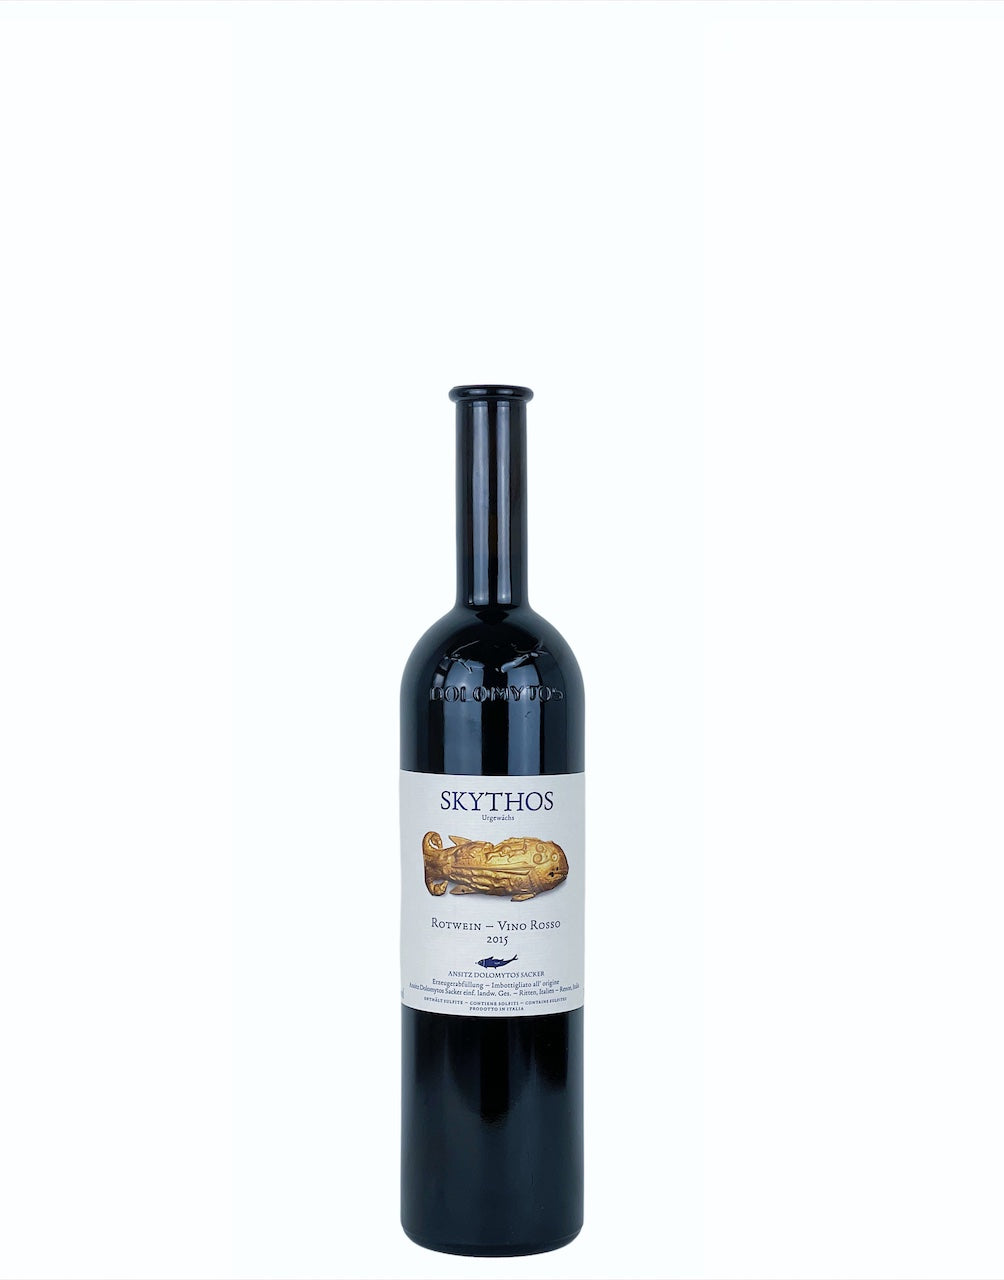 A bottle of Skythos a natural wine by Ansitz Dolomytos Sacker made with Sangiovese, Pinot Noir and other grape varieties. 